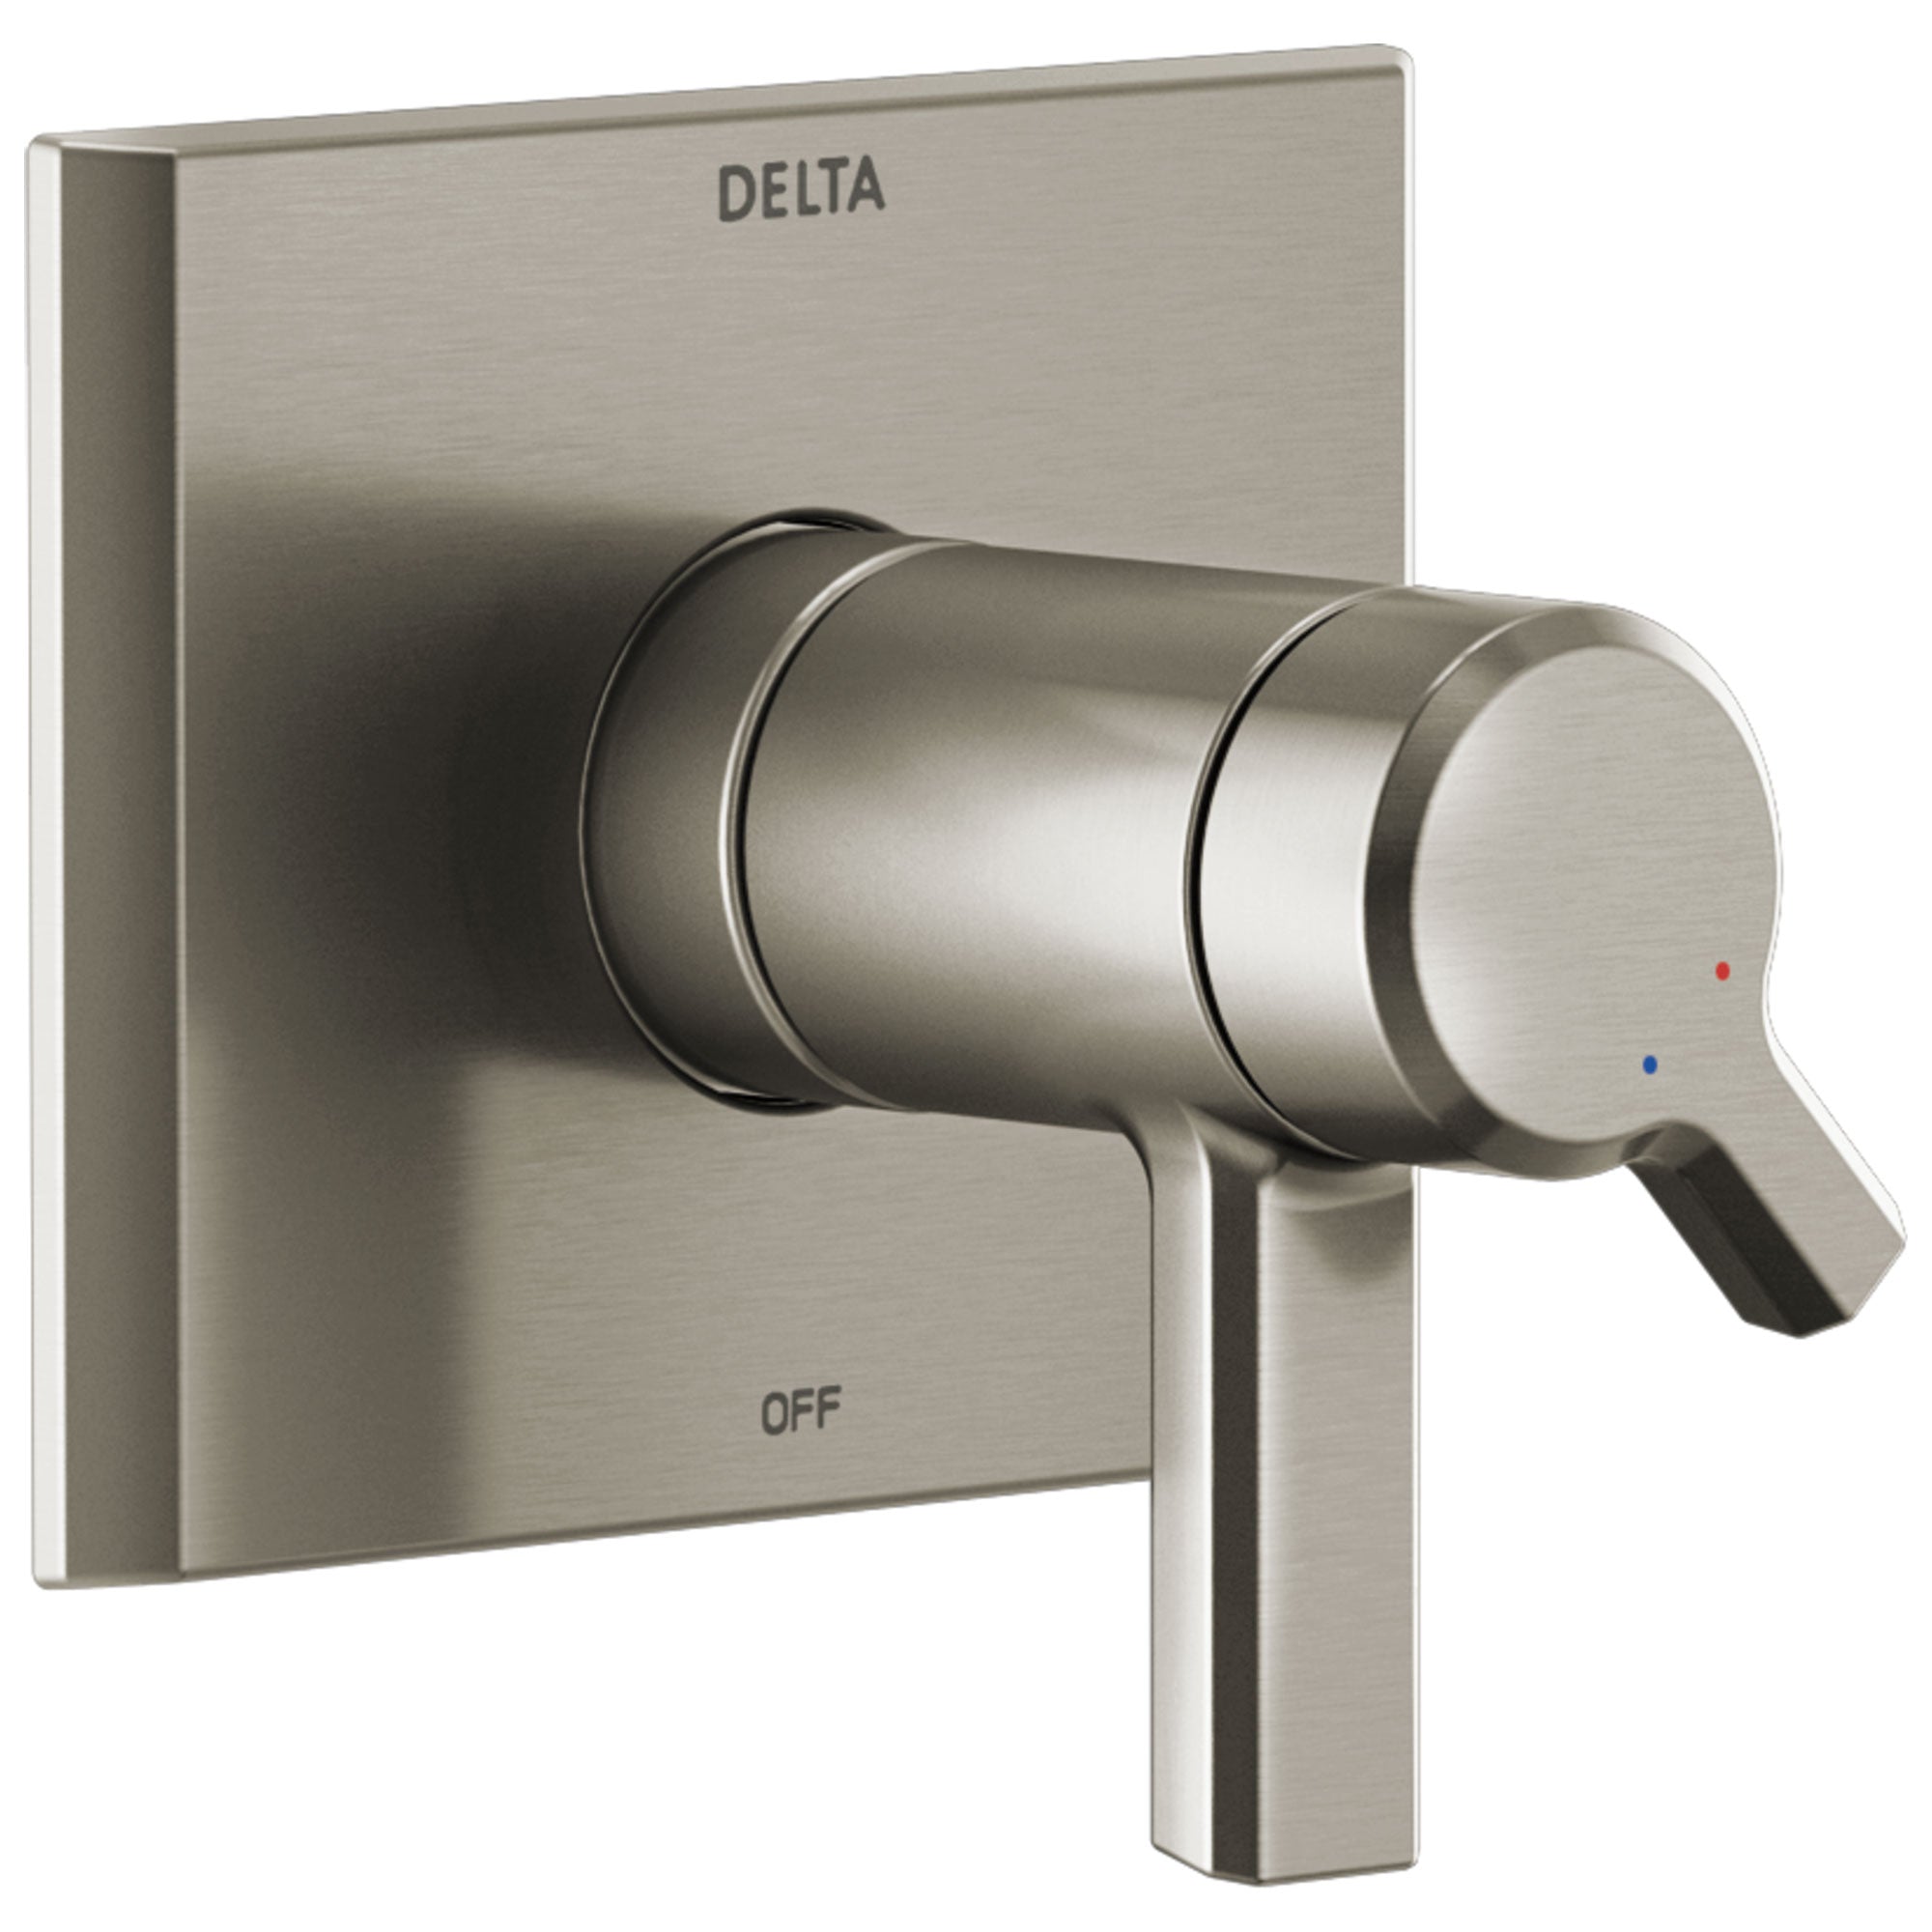 Delta Pivotal Stainless Steel Finish TempAssure 17T Series Shower Faucet Control Only Trim Kit (Requires Valve) DT17T099SS